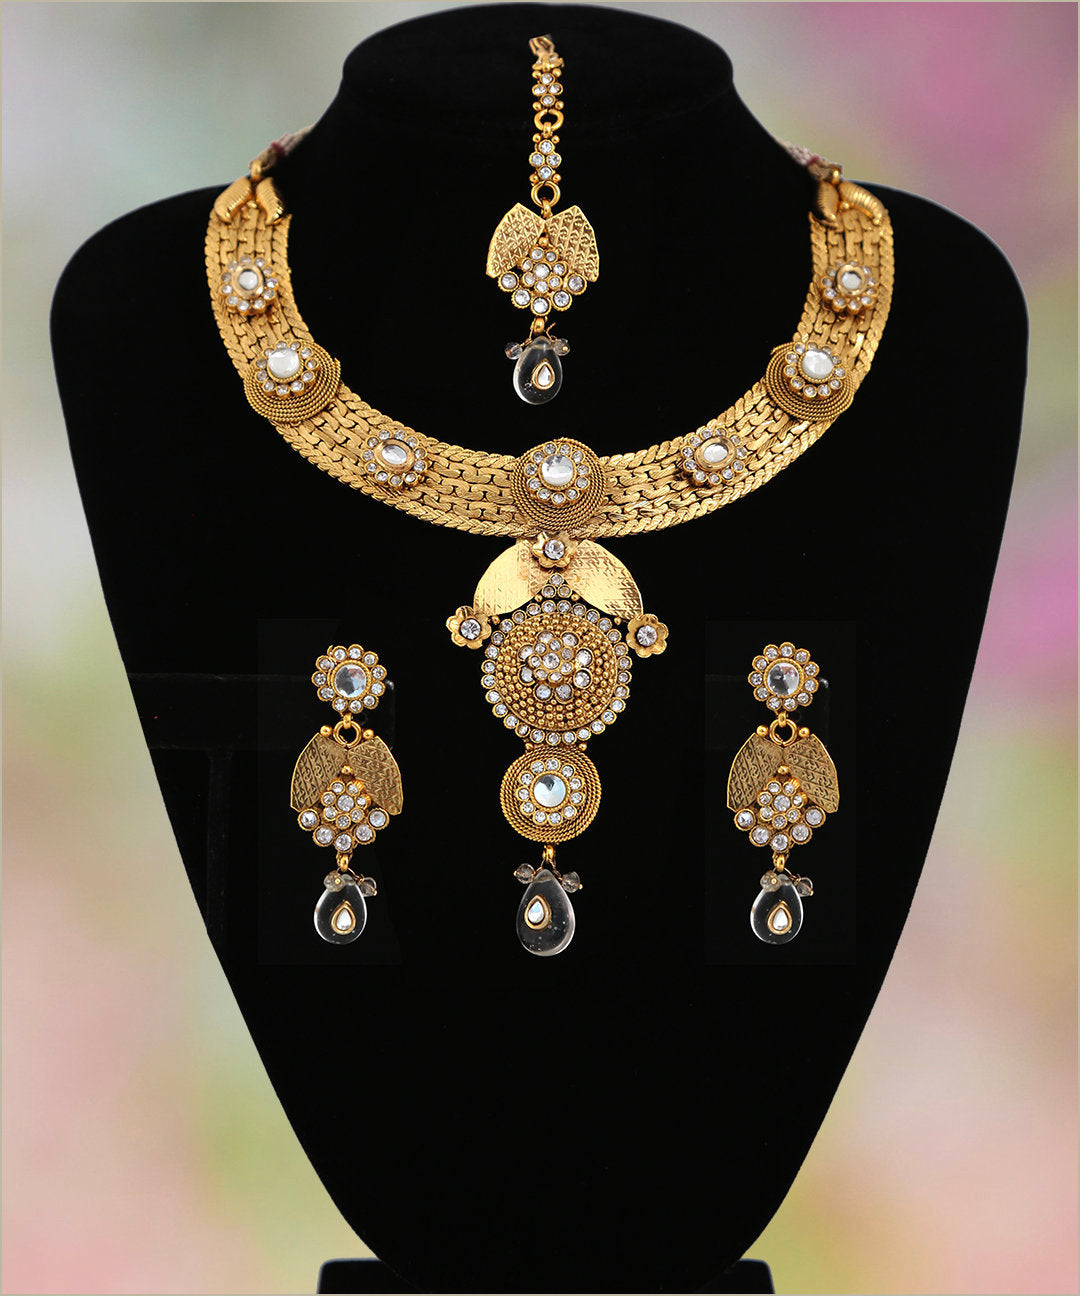 Indian bridal polki jewelry set hand crafted in a gold background with white stones|Wedding Party Wear Jewellery|Gold Plated Ethnic Necklace